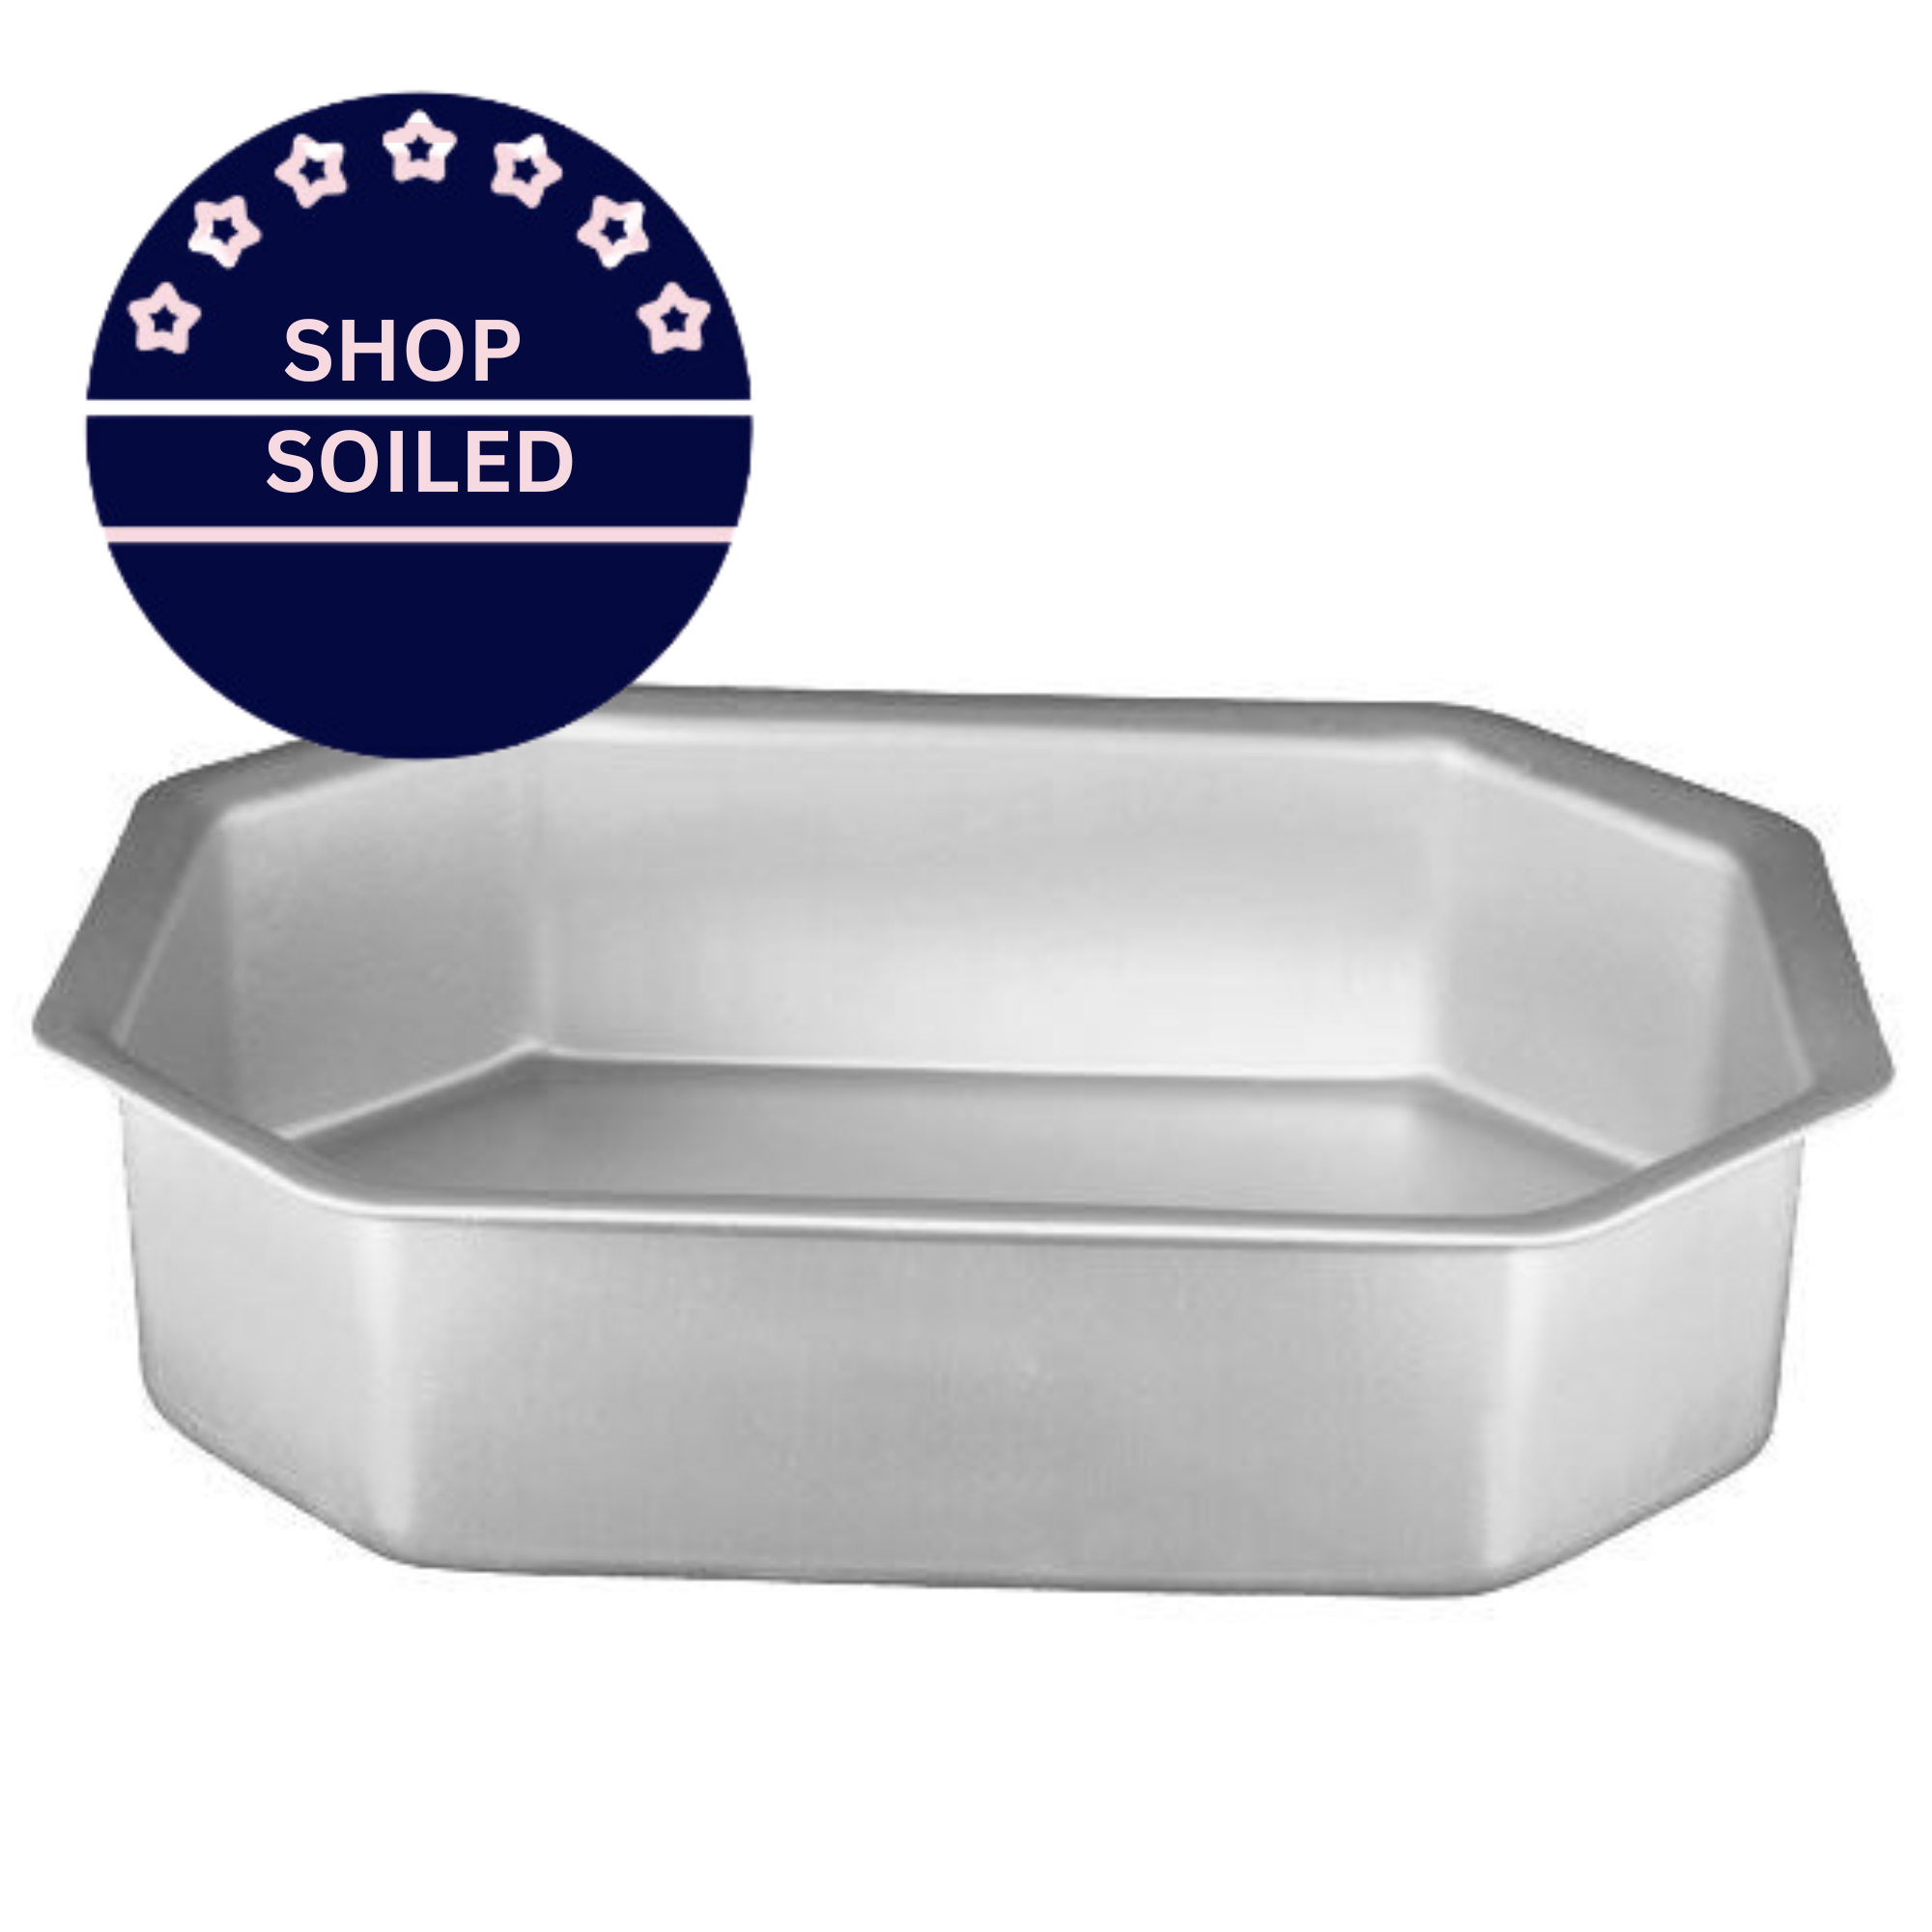 SHOP SOILED - Fat Daddio's from Silverwood Professional Silver Anodised Baking Tin Pan - Corner Cut Rectangle - 13" x 10" x 3"